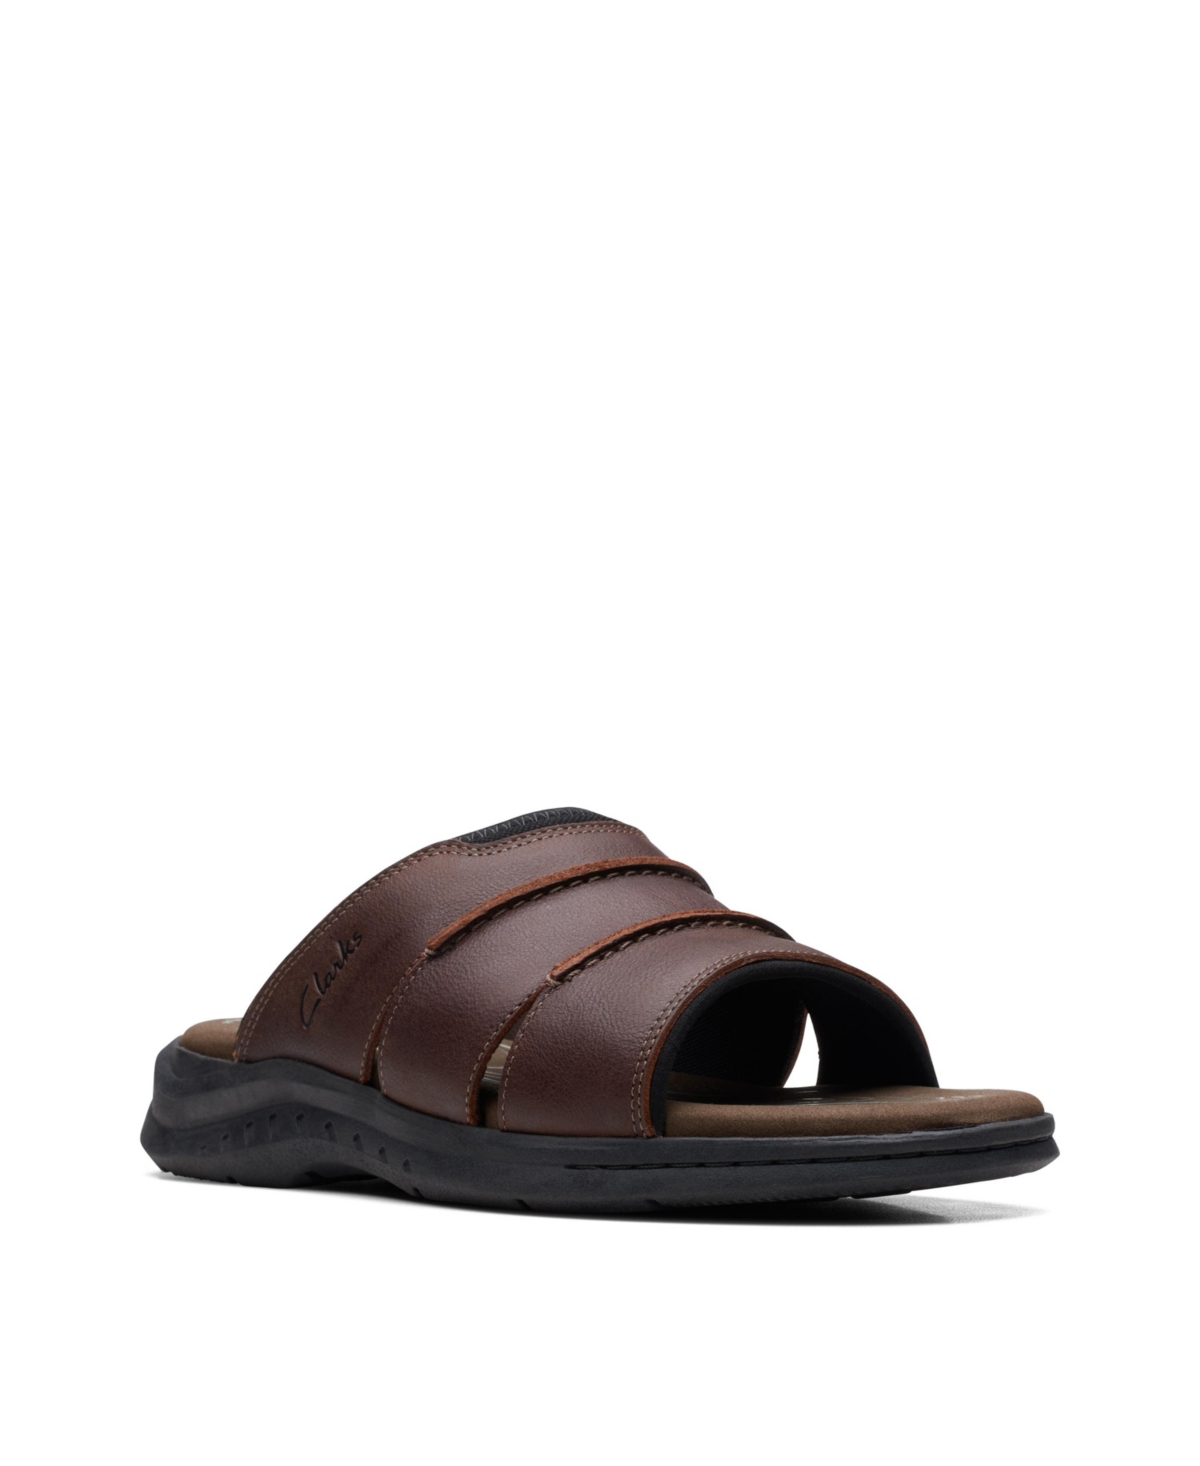 Clarks Men's Leather Walkford Easy Slide Sandals In Brown Tumbled Leather